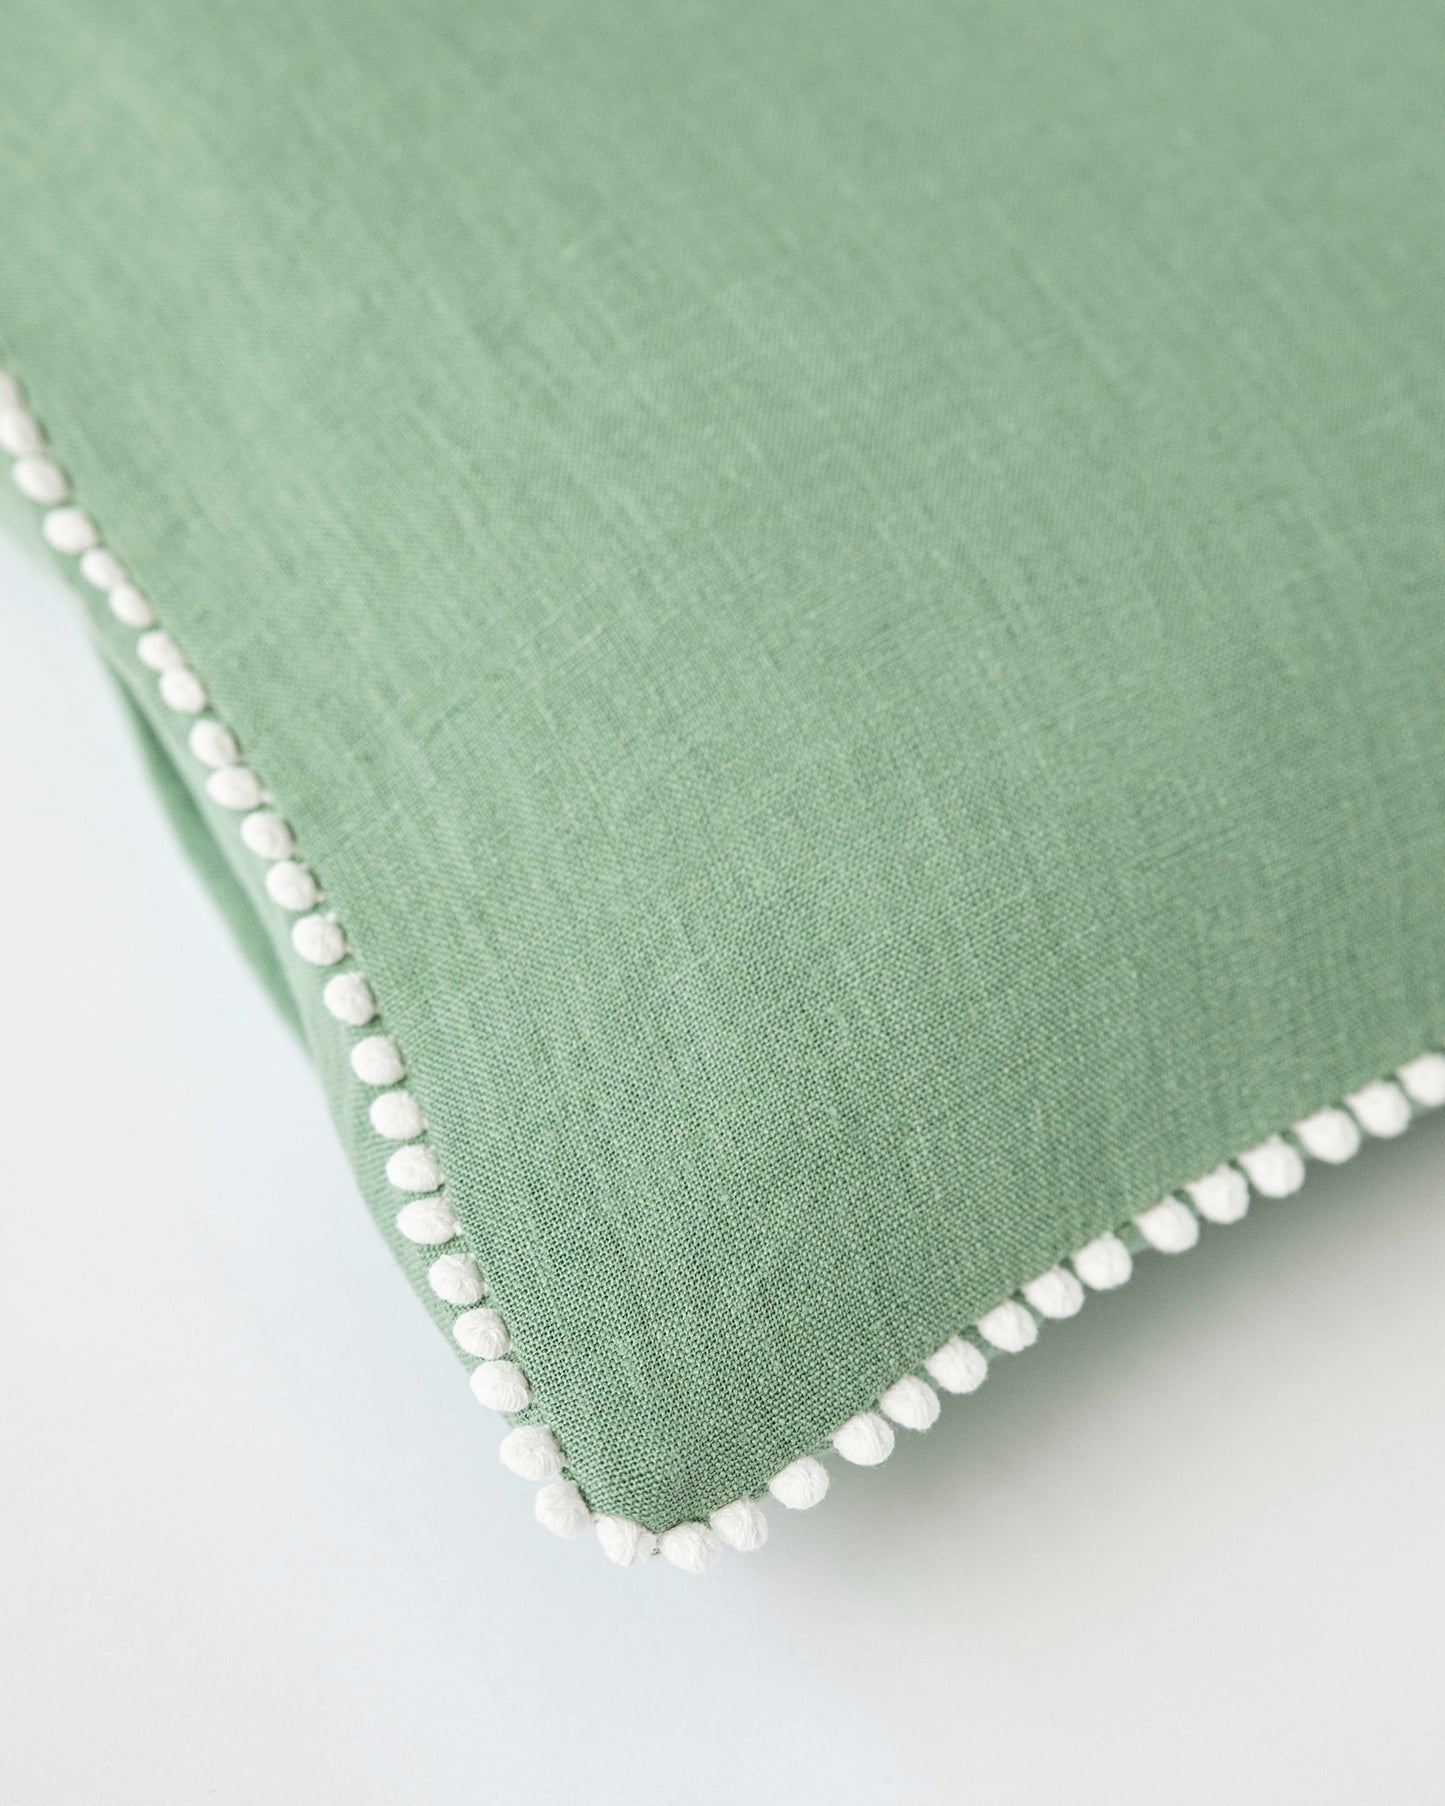 Cushion cover with pom poms in Matcha green - MagicLinen